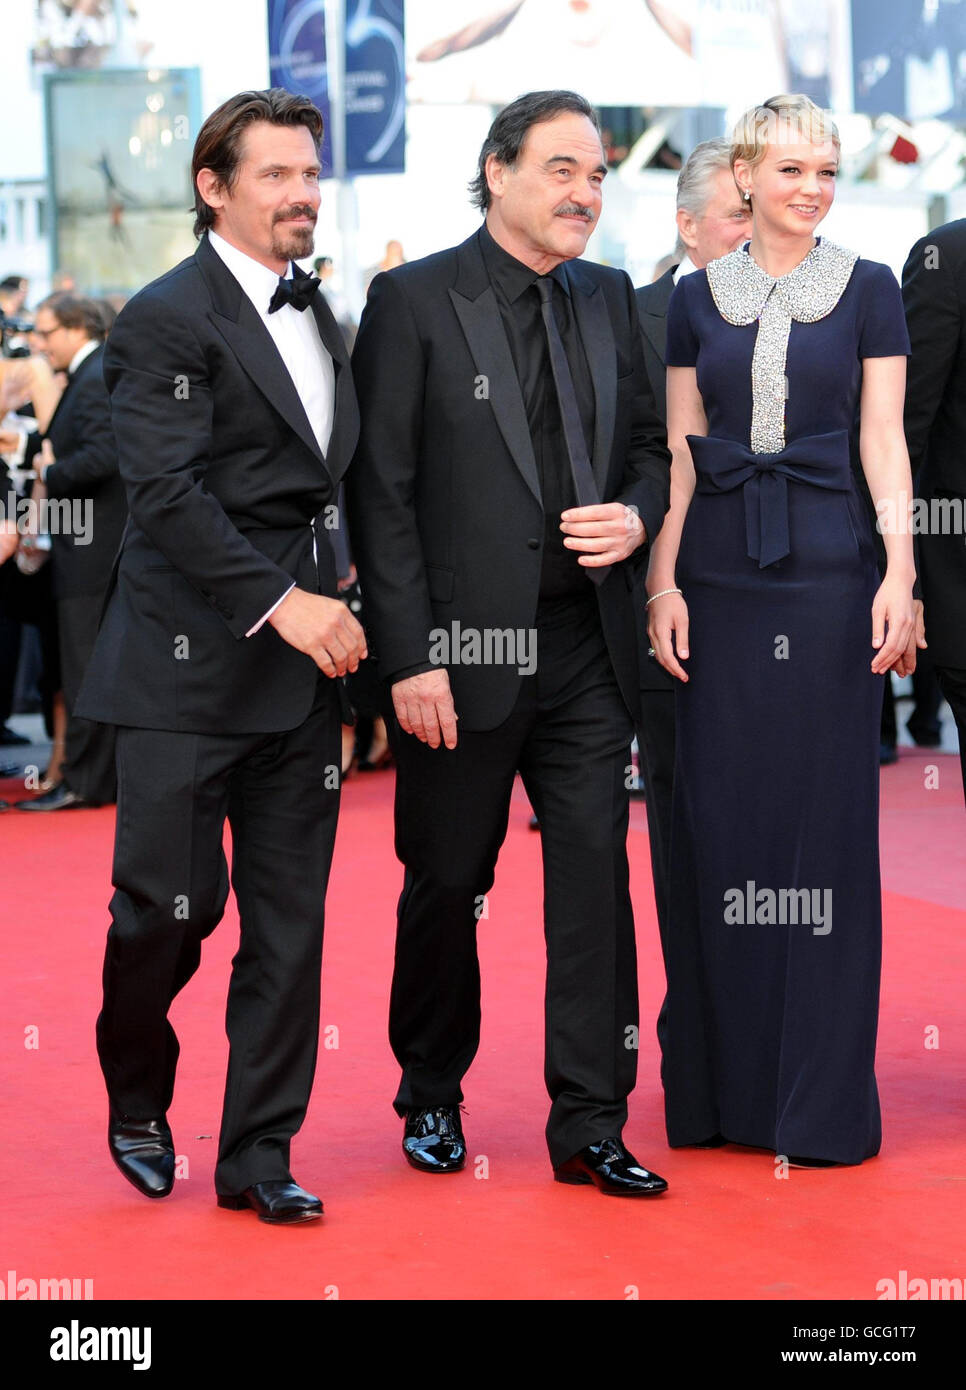 (From the left) Josh Brolin, director Oliver Stone and Carey Mulligan arrive for the screening of Wall Street: Money Never Sleeps at the Grand Auditorium Lumiere during the Cannes Film Festival, France. Stock Photo